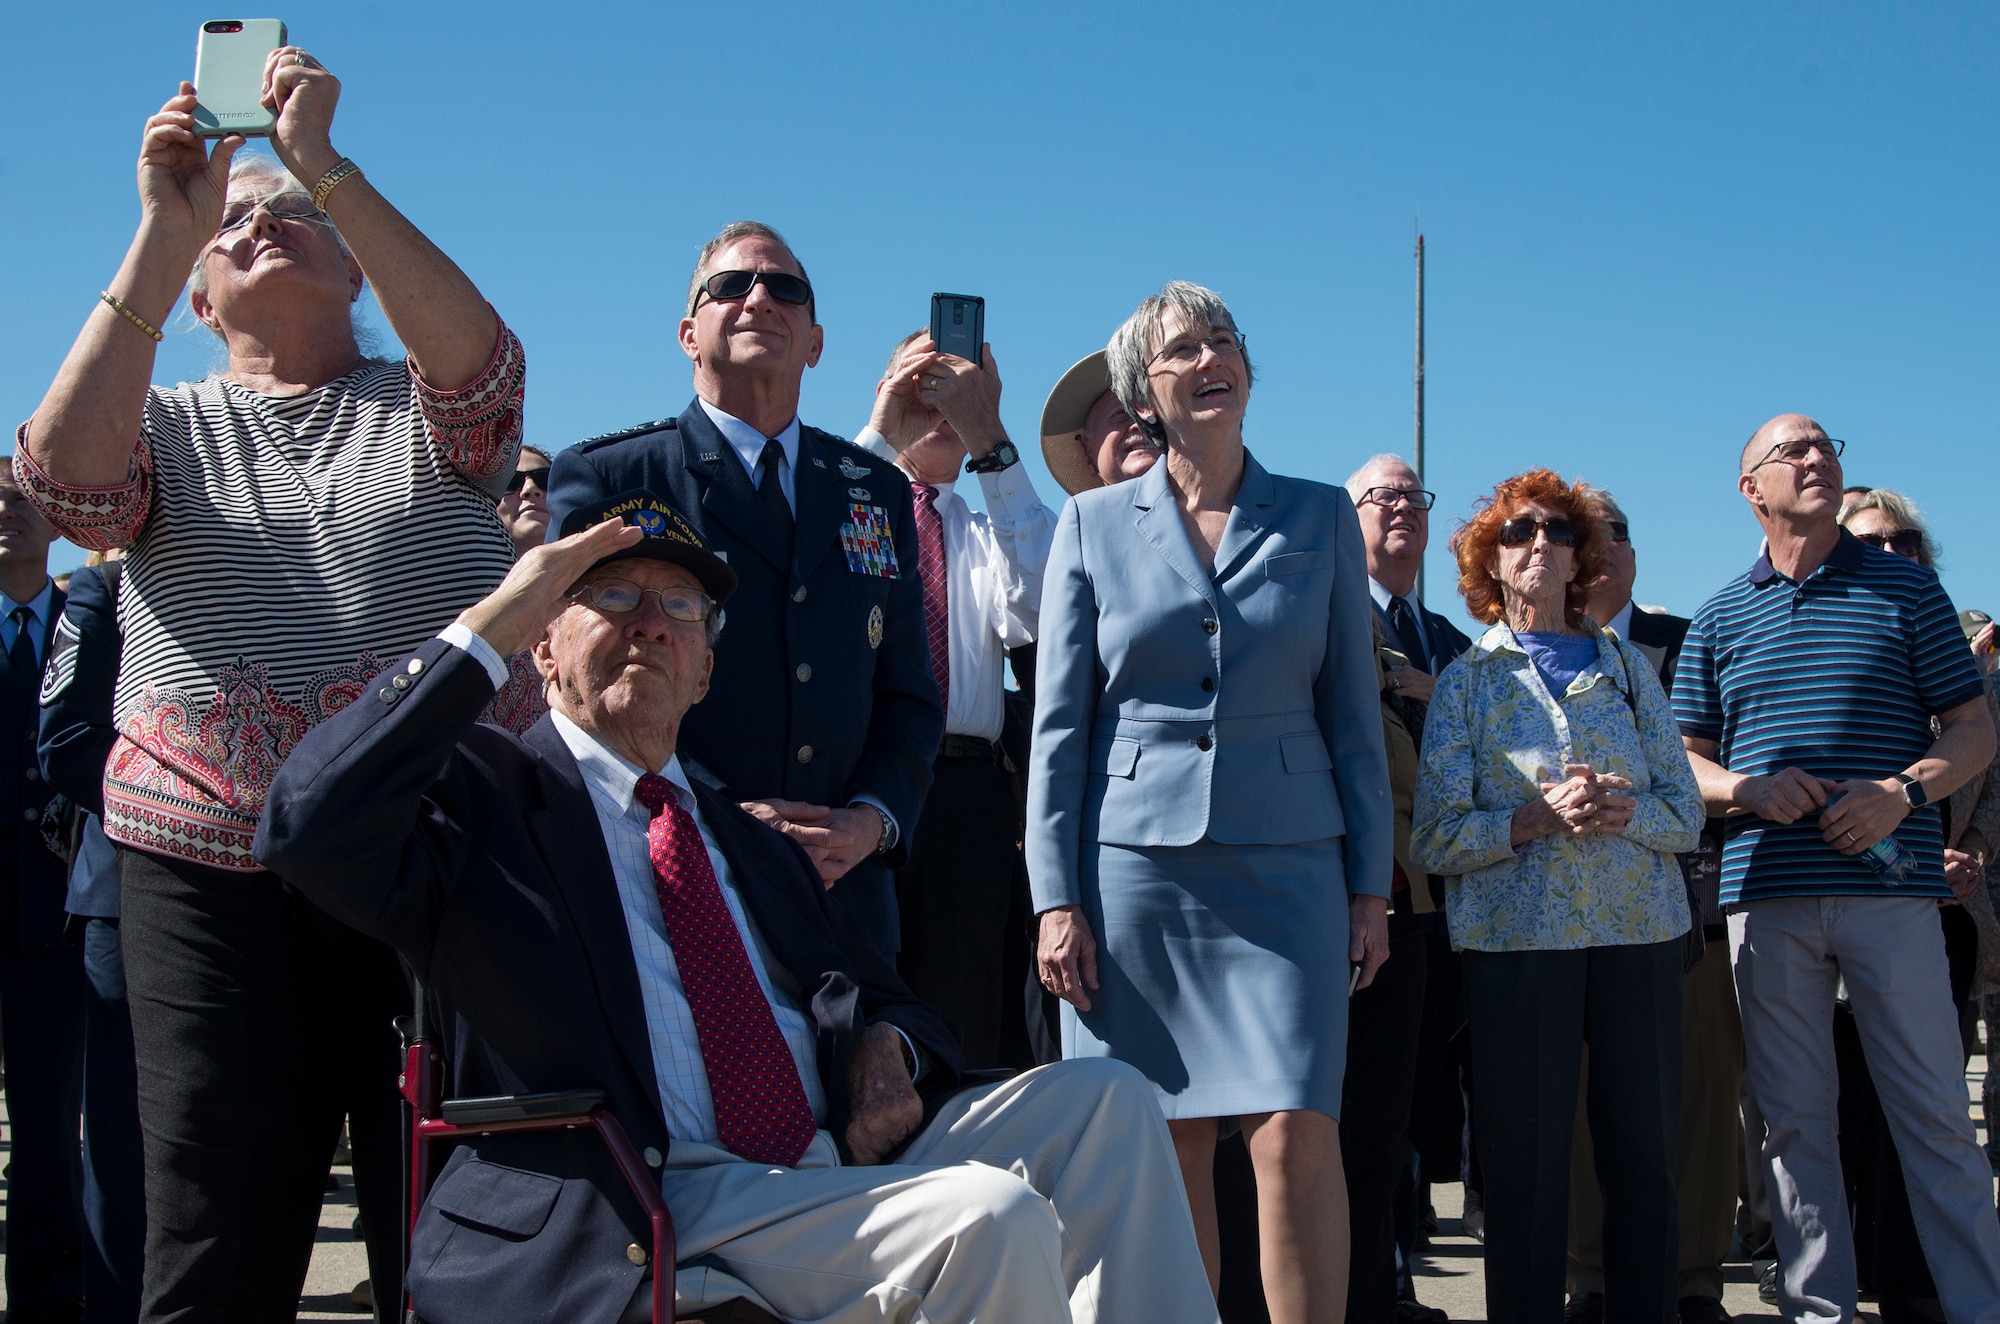 The family of retired U.S. Air Force Lt. Col. Richard “Dick” E. Cole, Chief of Staff of the Air Force General Goldein, and Secretary of the Air Force Heather Wilson watch the T-38C Talon Missing Man flyover during a memorial service celebrating Cole's life at Joint Base San Antonio-Randolph, Texas, April 18, 2019.